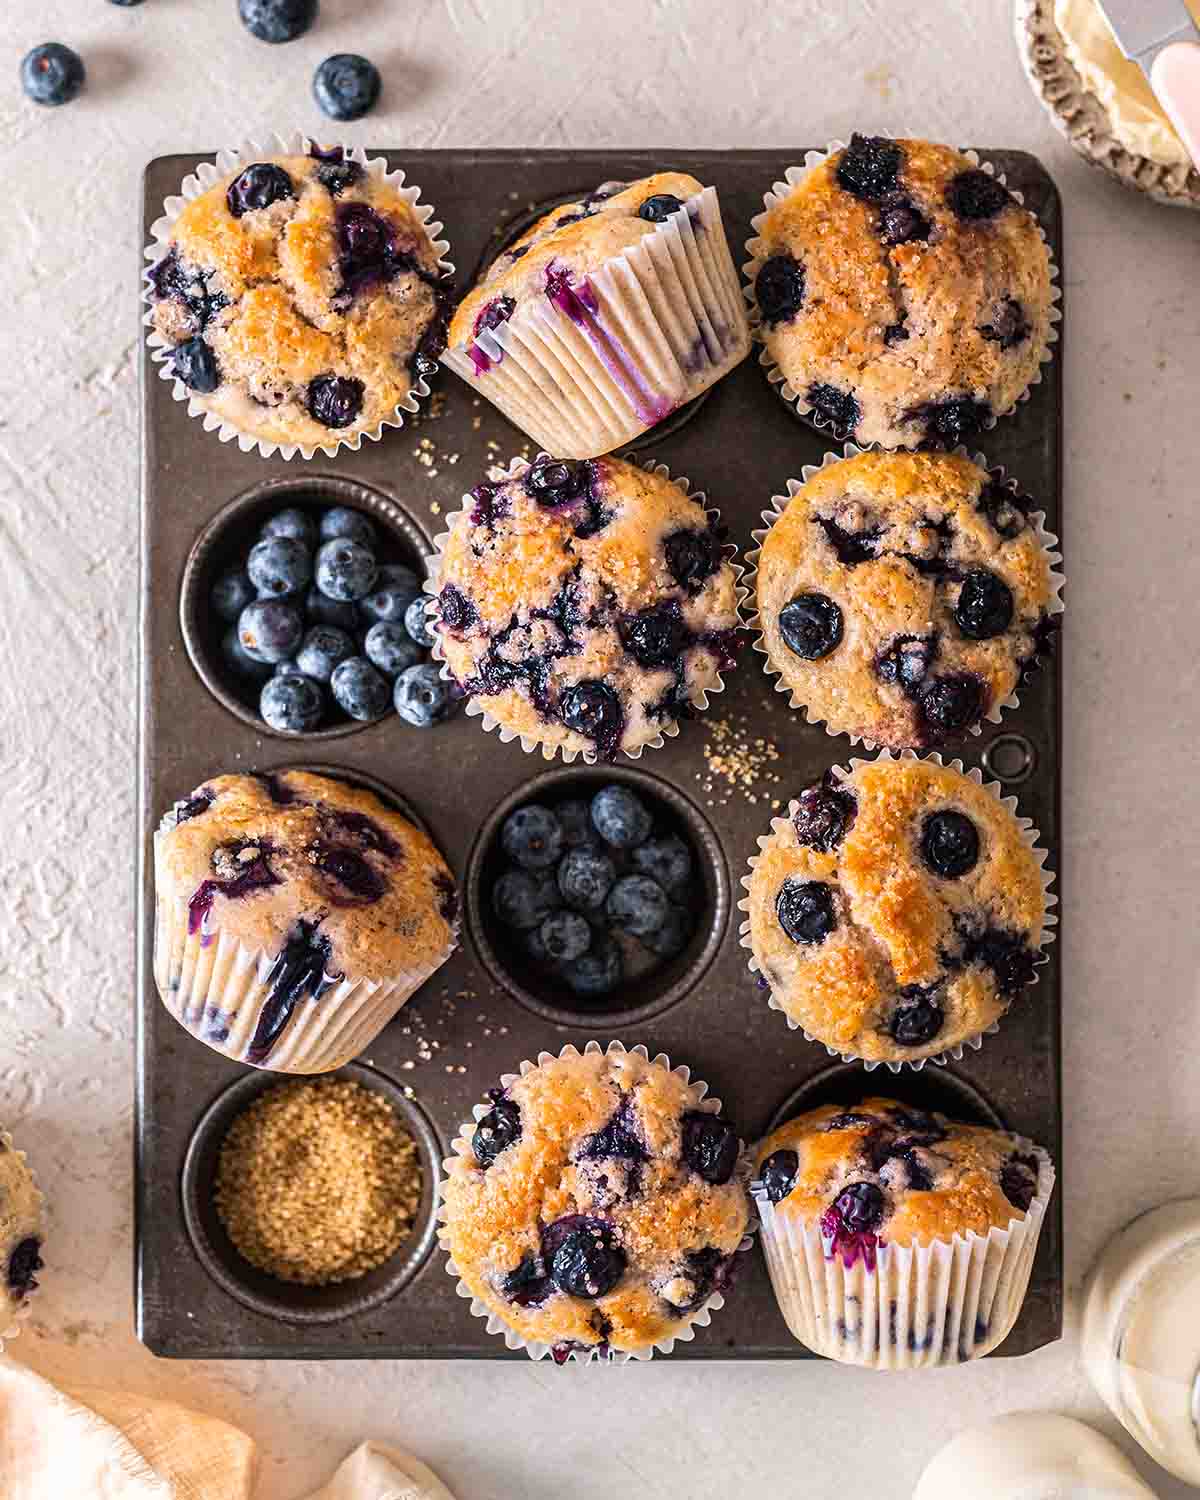 Overhead image of blueberry muffins in tray with pops of purple.